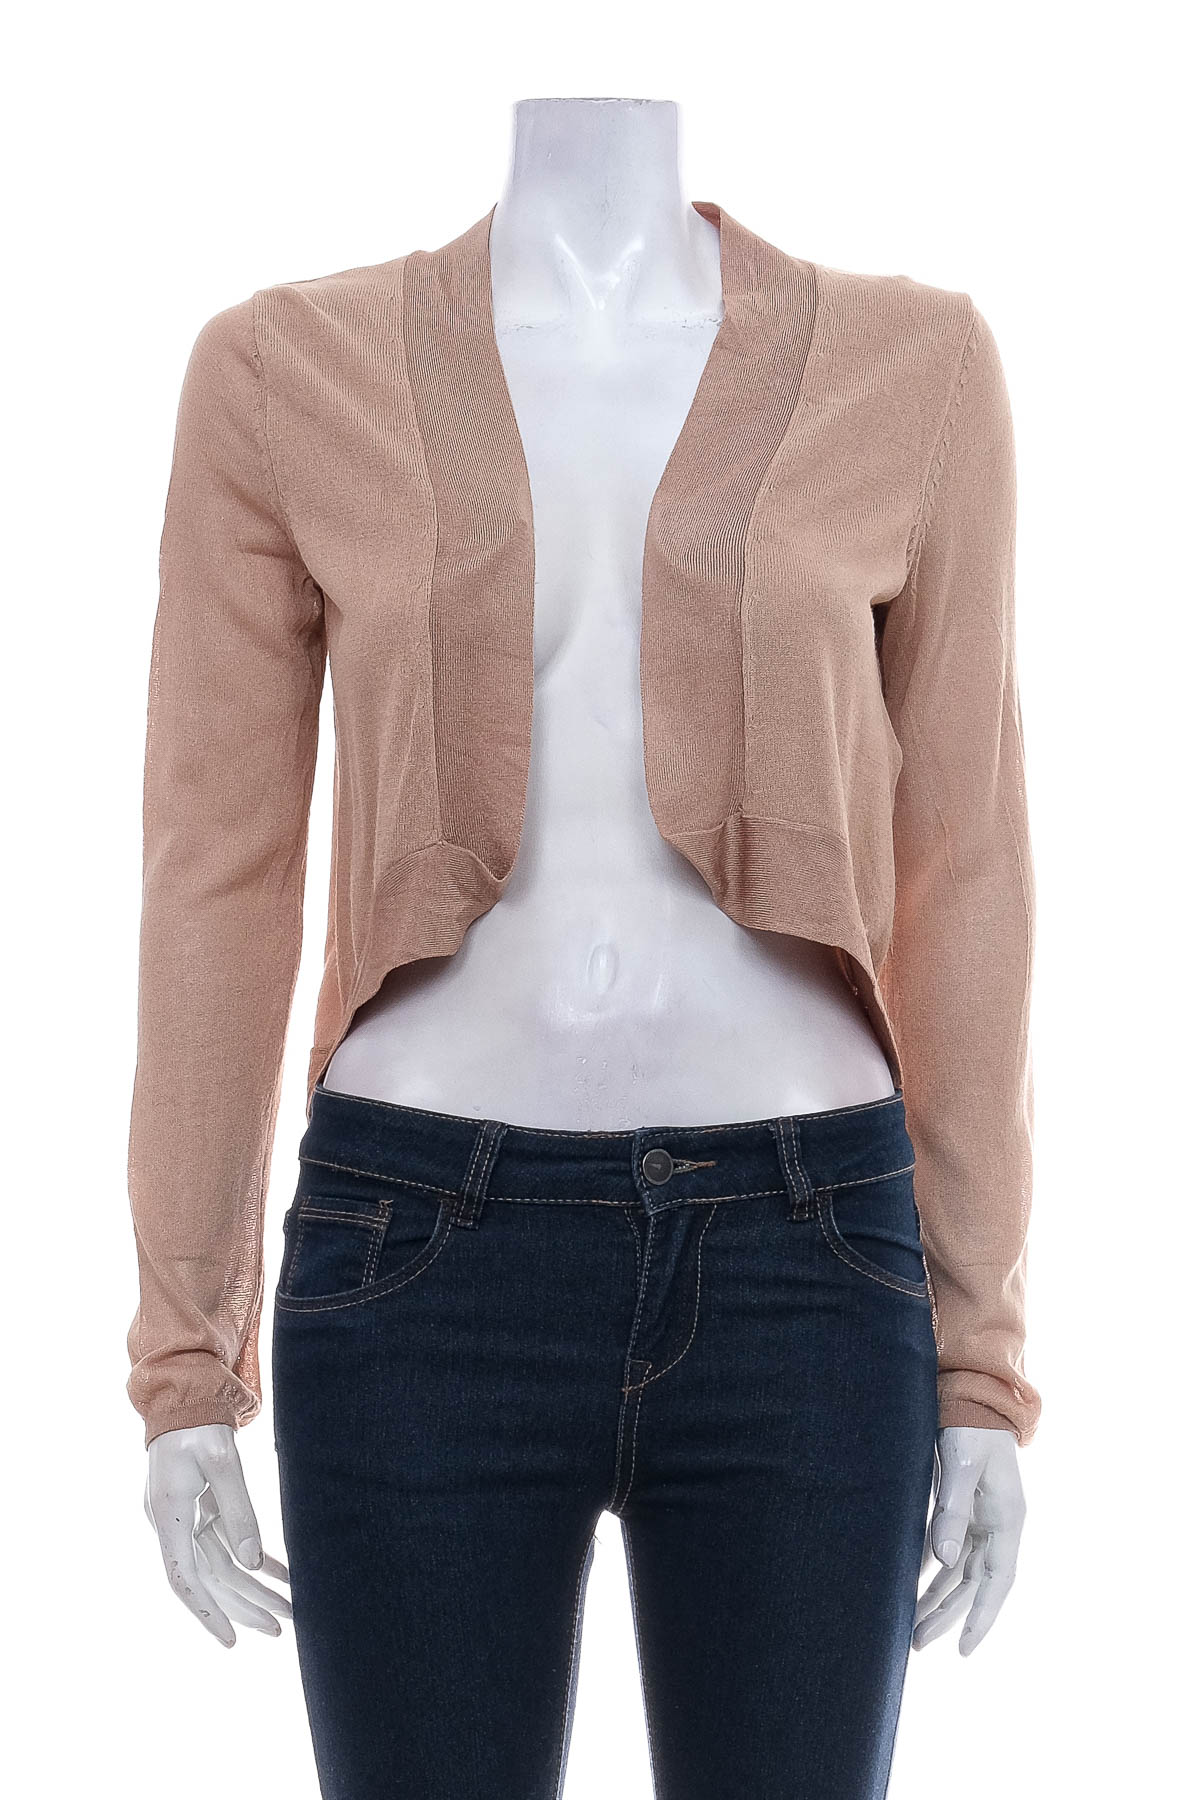 Women's cardigan - M&S COLLECTION - 0